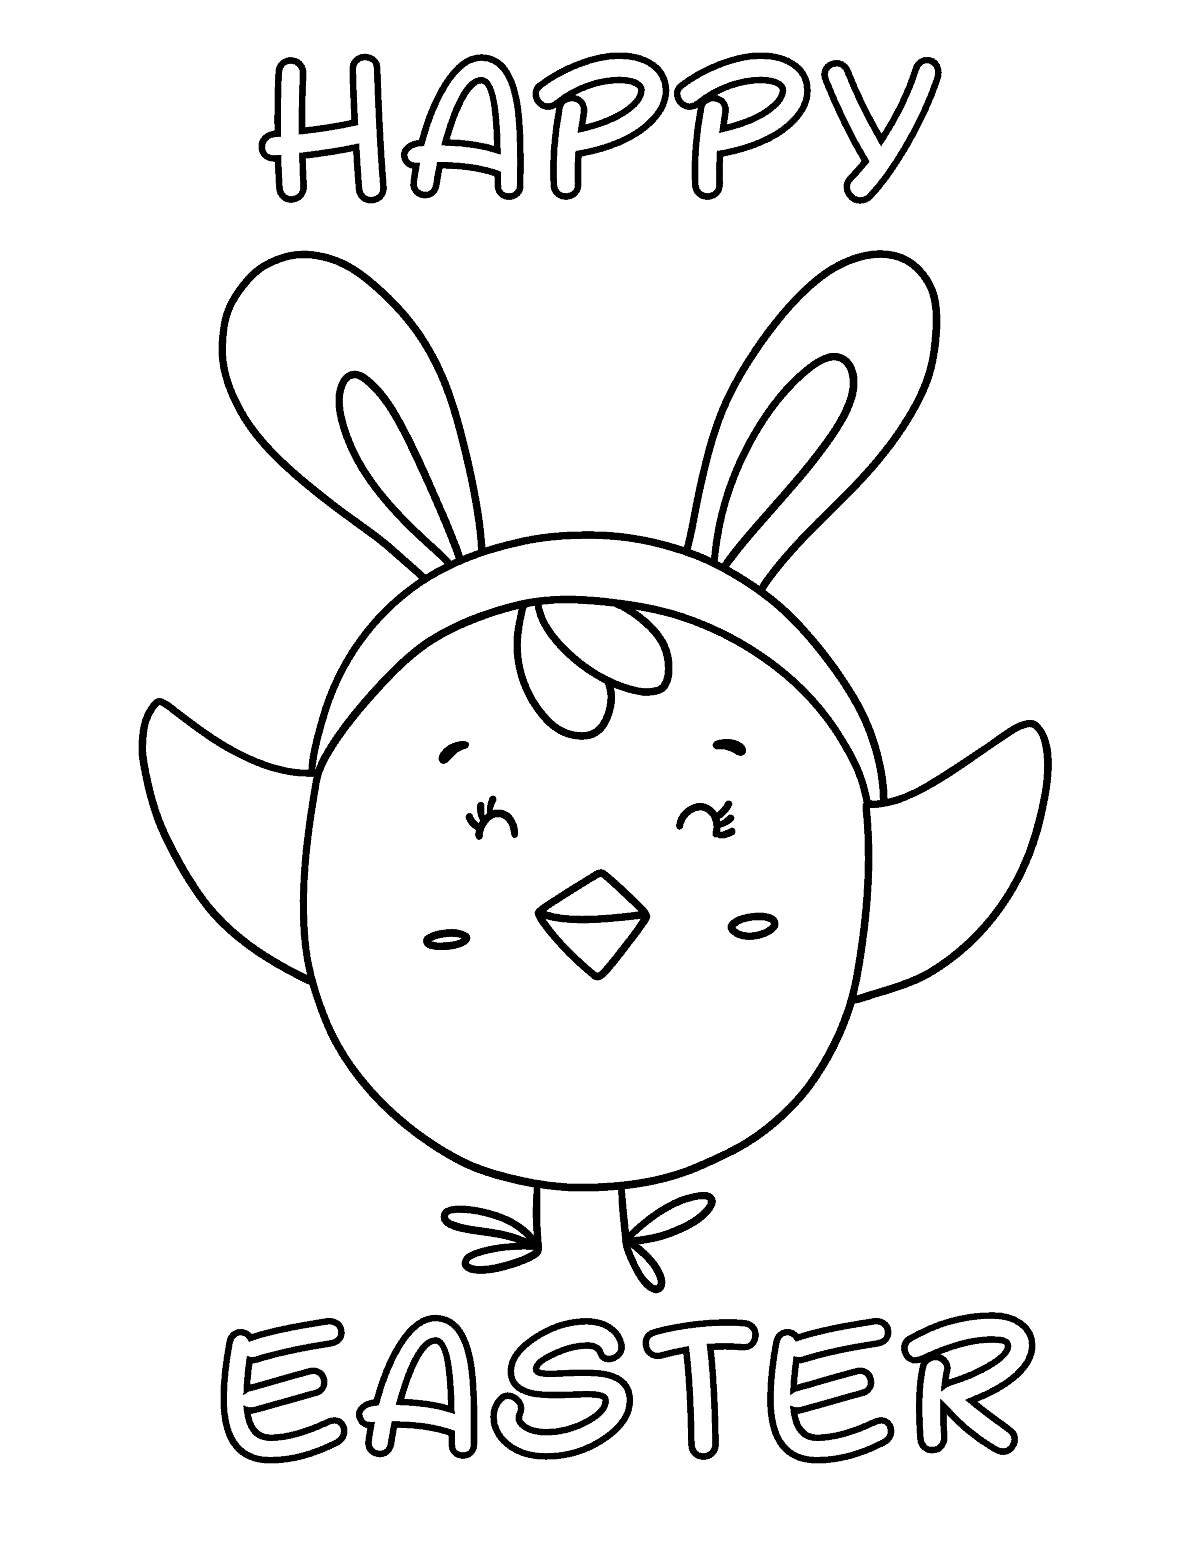 Easter Chick with Bunny Ears Coloring Page